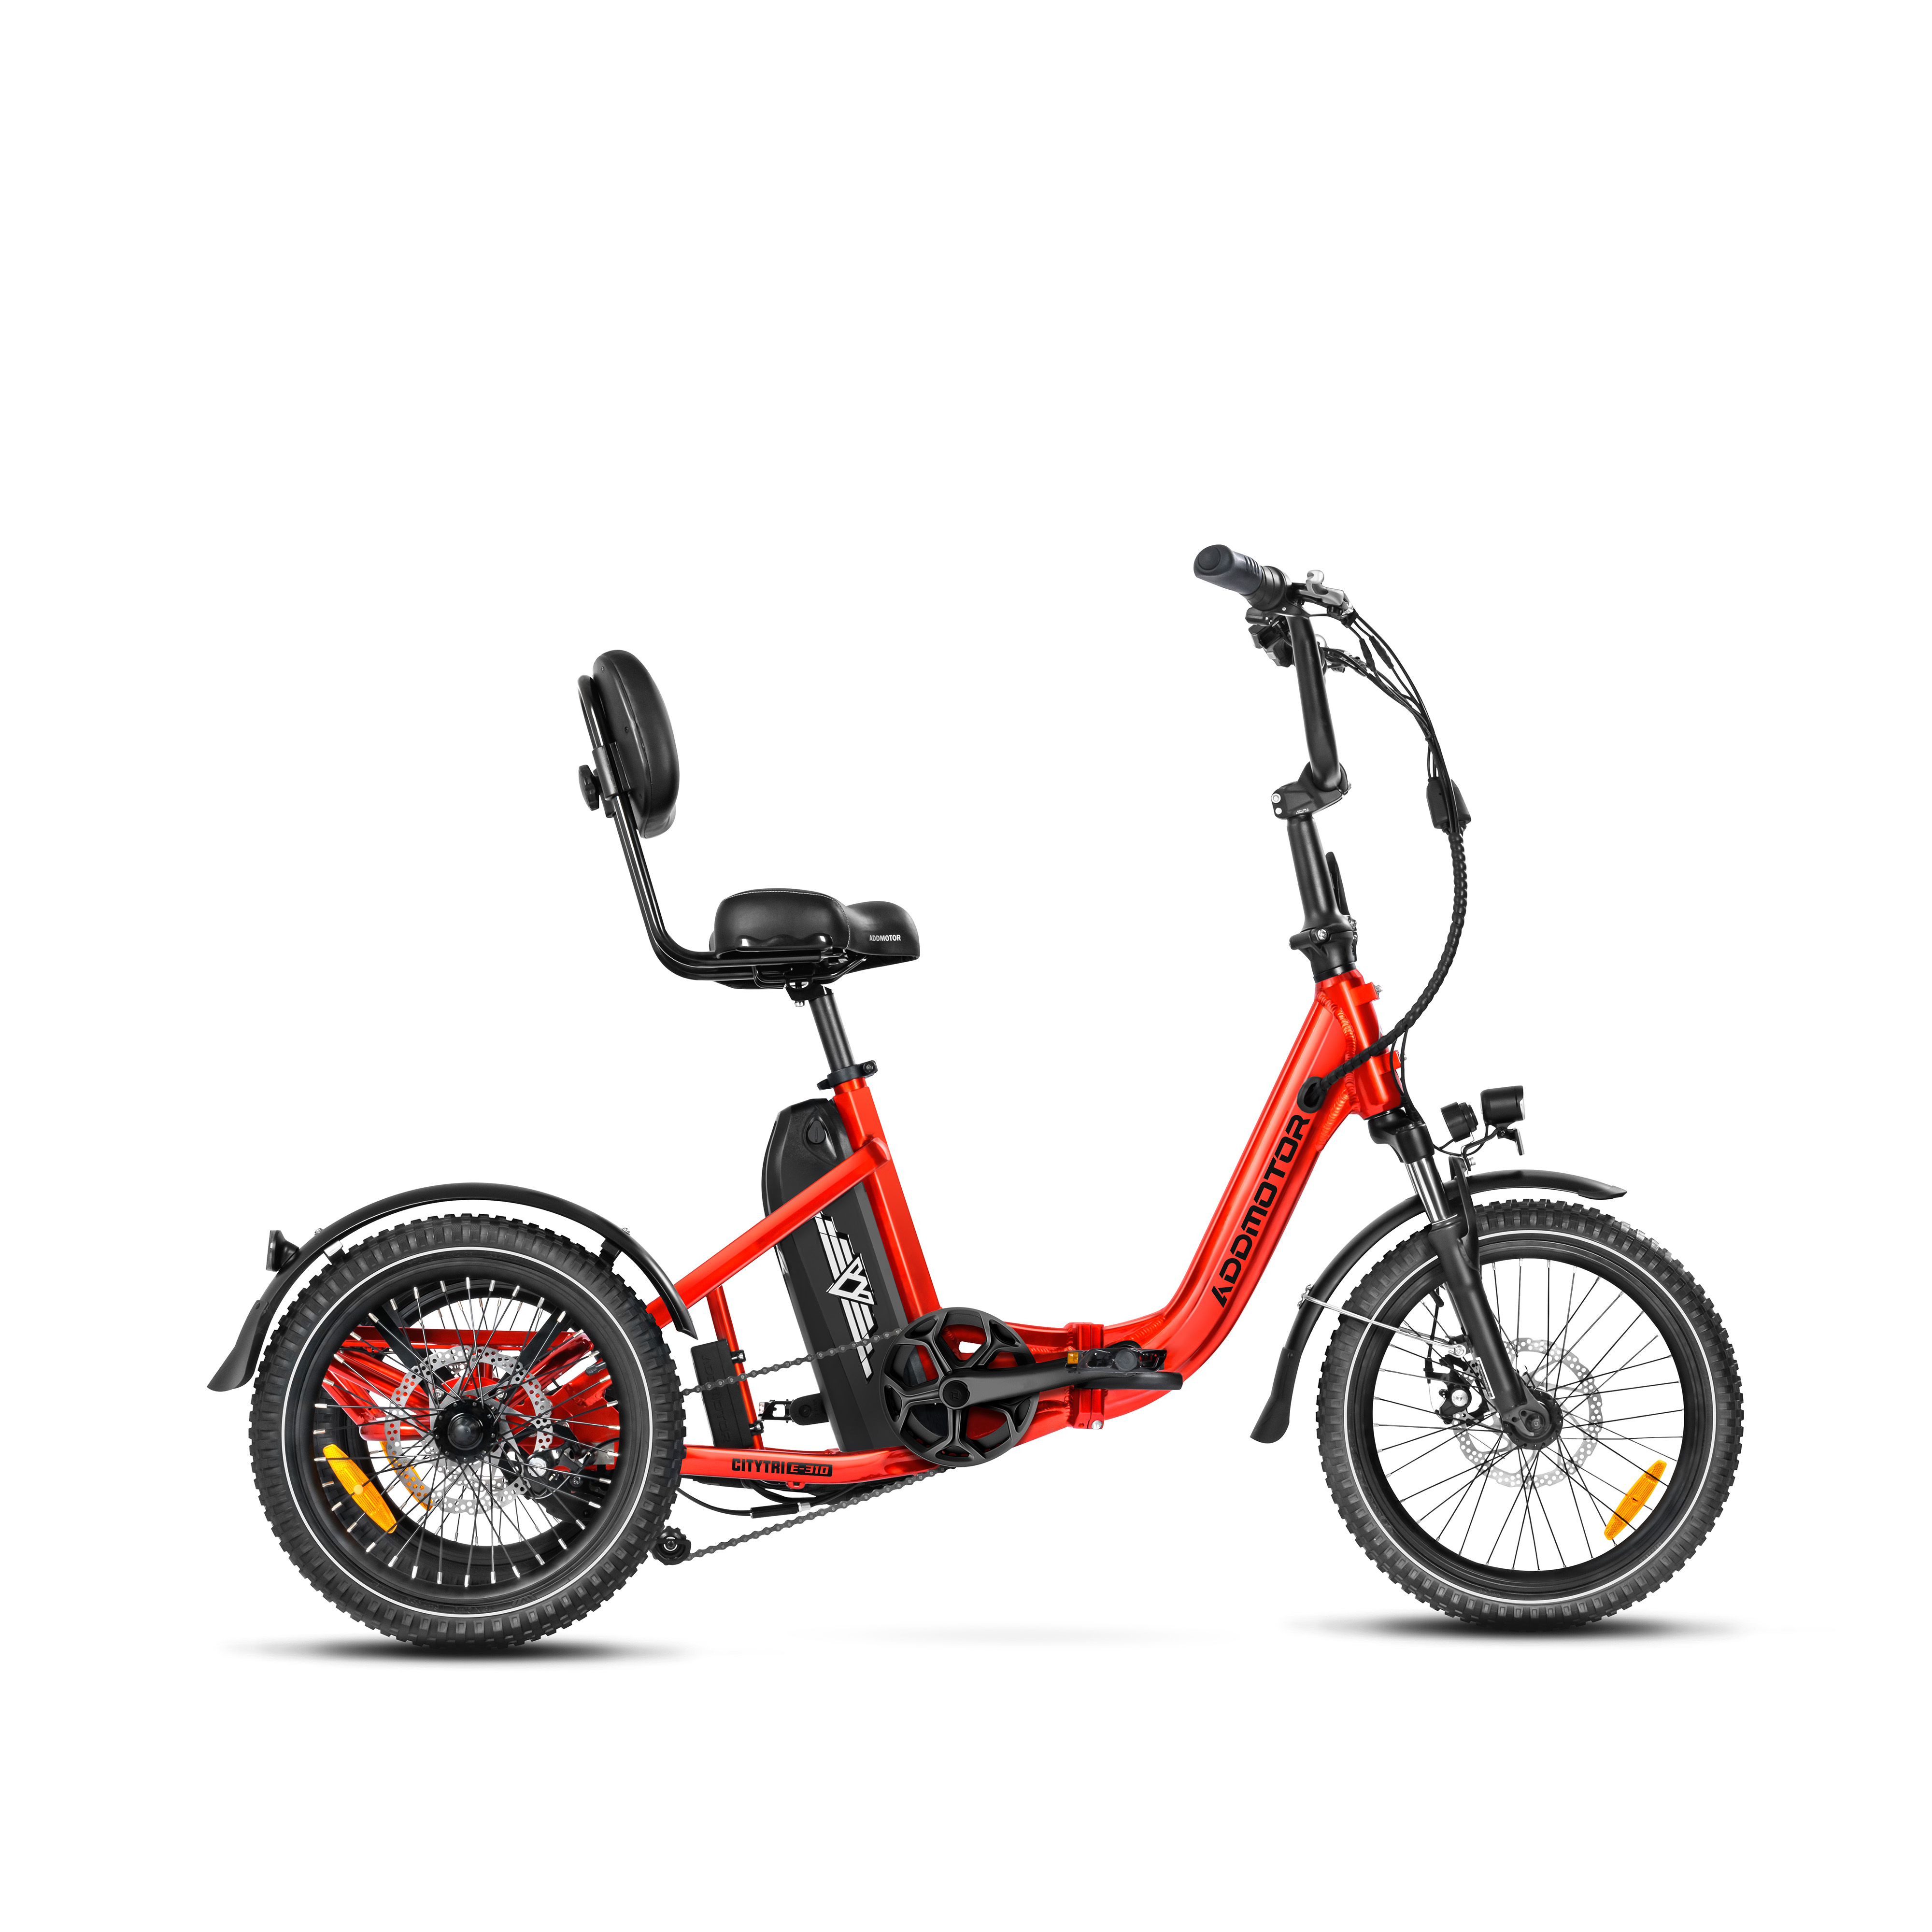 Addmotor Citytri E-310 Mini 750W Electric Trike for Adults Best Electric Tricycle Under $2000 Up To 90 Miles - Candy Red